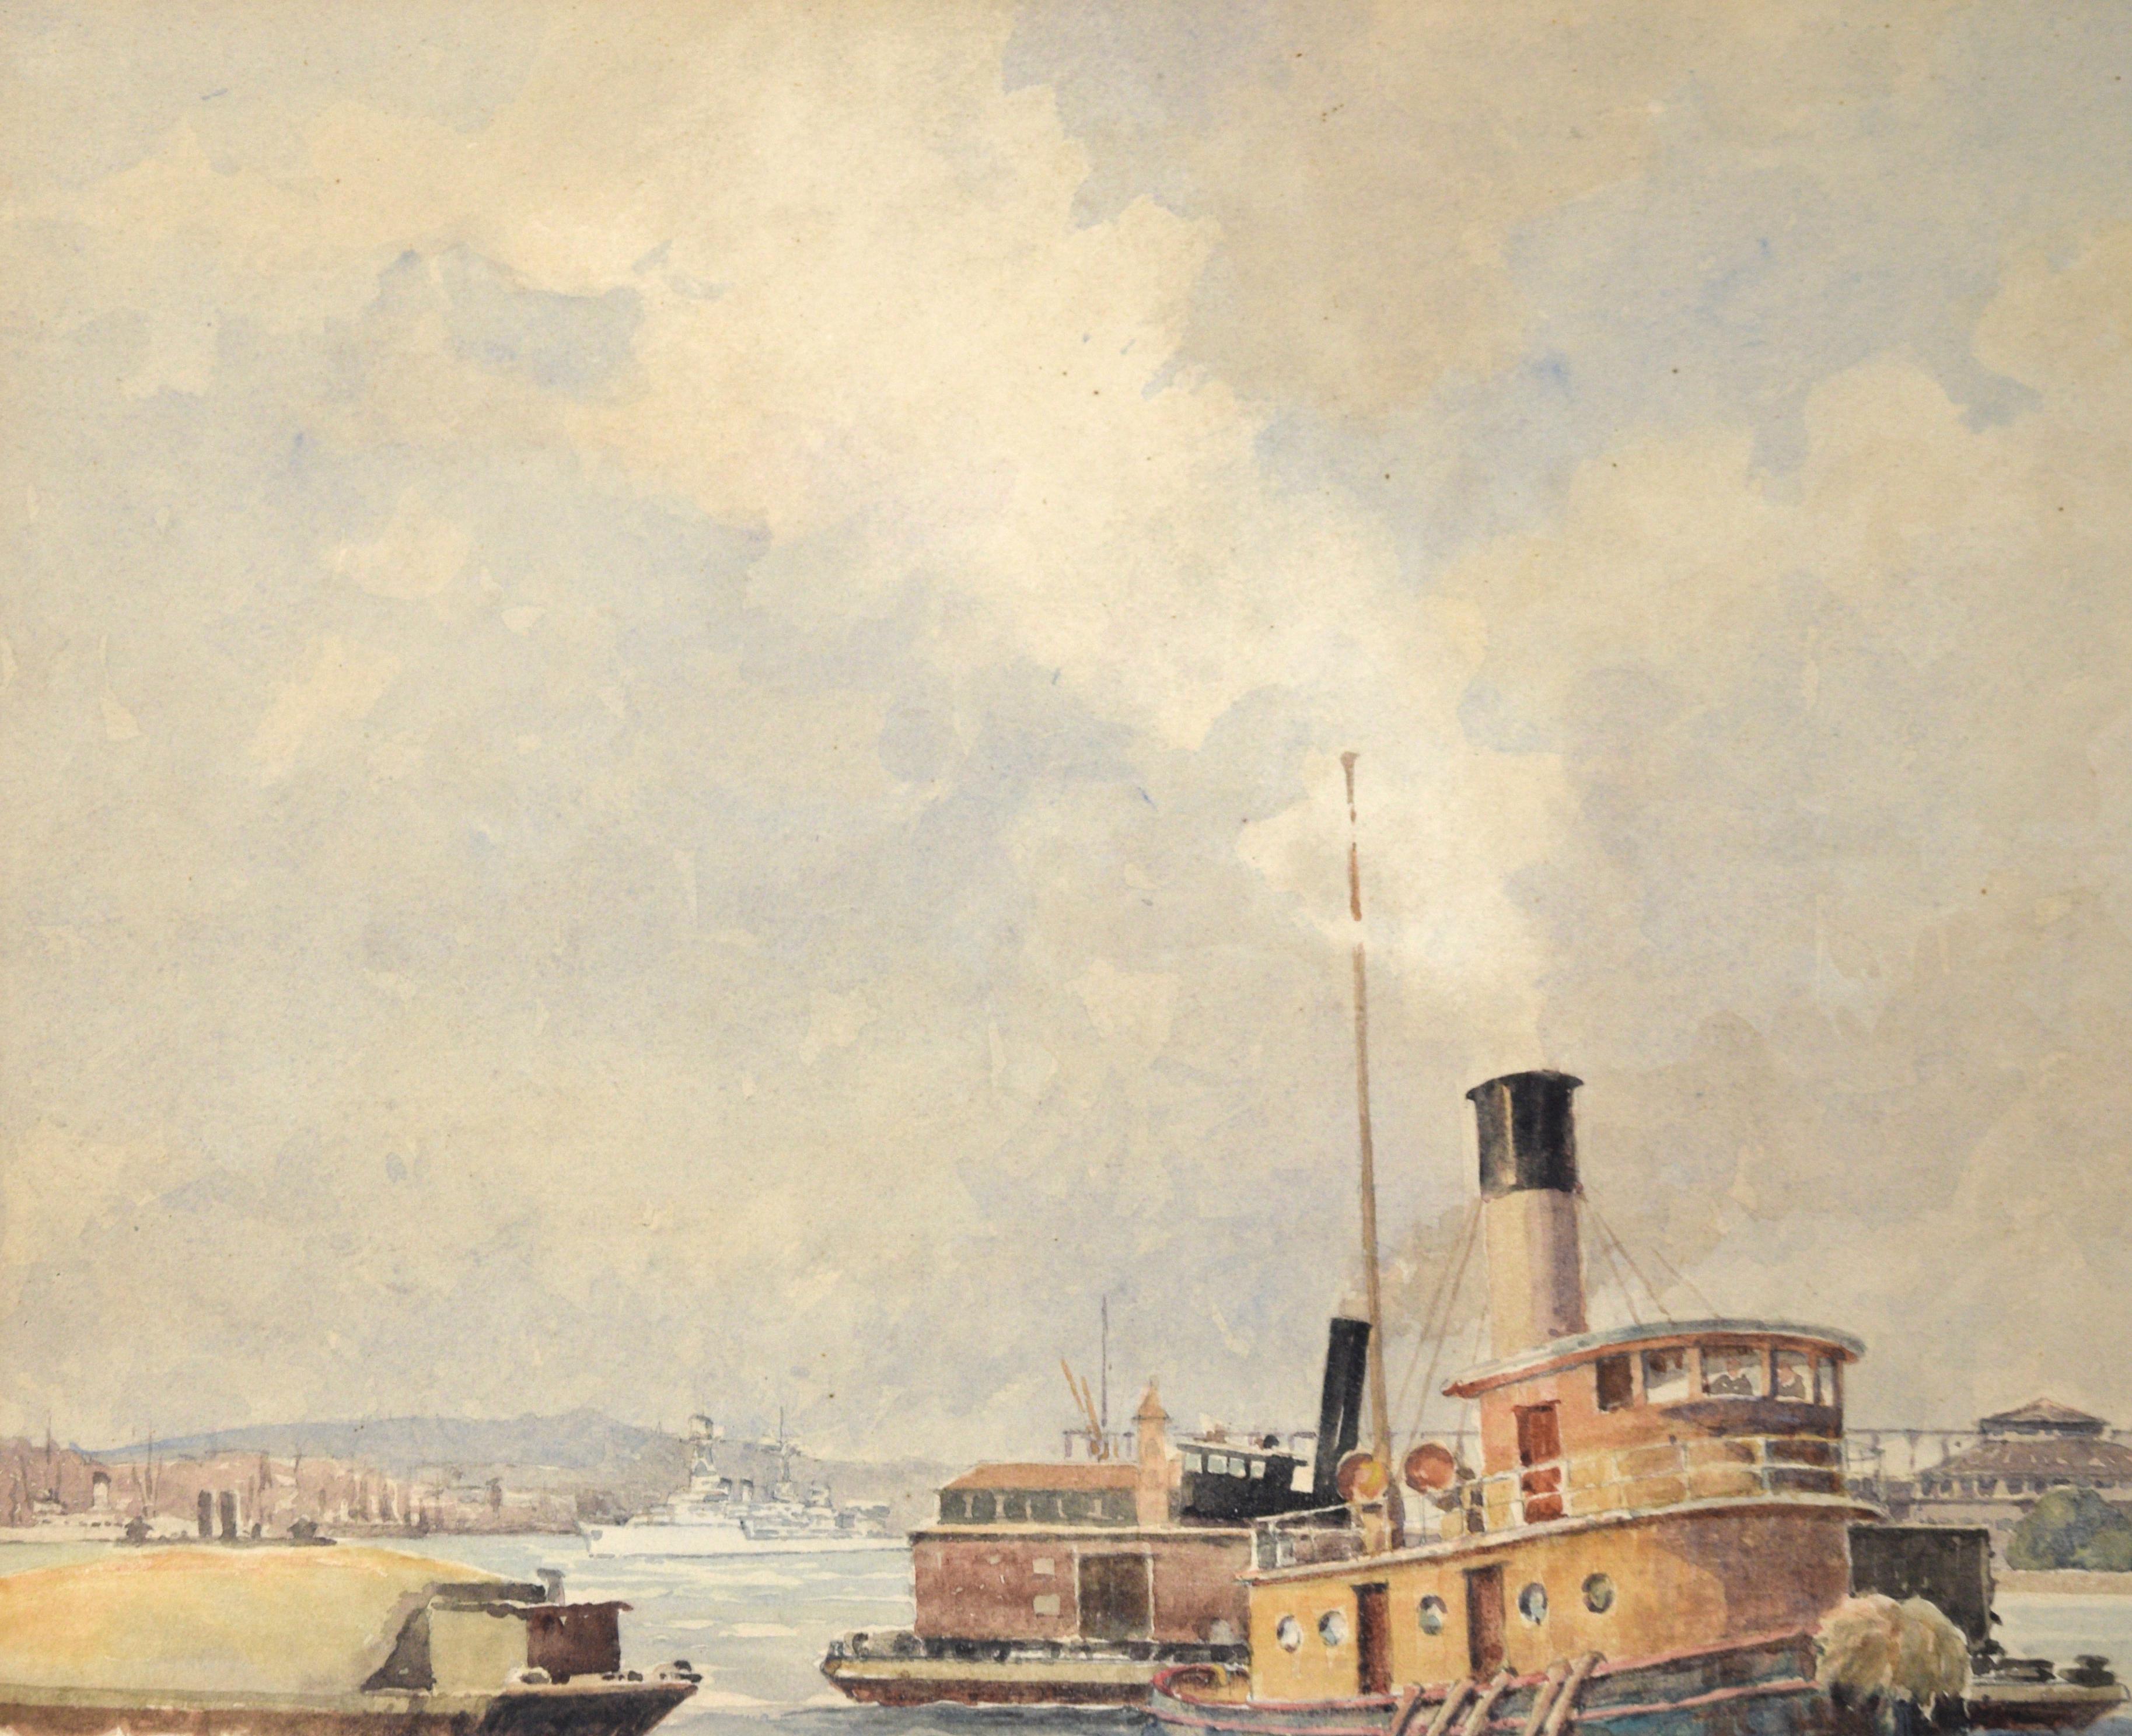 Whitehall Building, July 1939 - Harbor Seascape with Tugboat in Watercolor - Impressionist Painting by Ernest Clegg